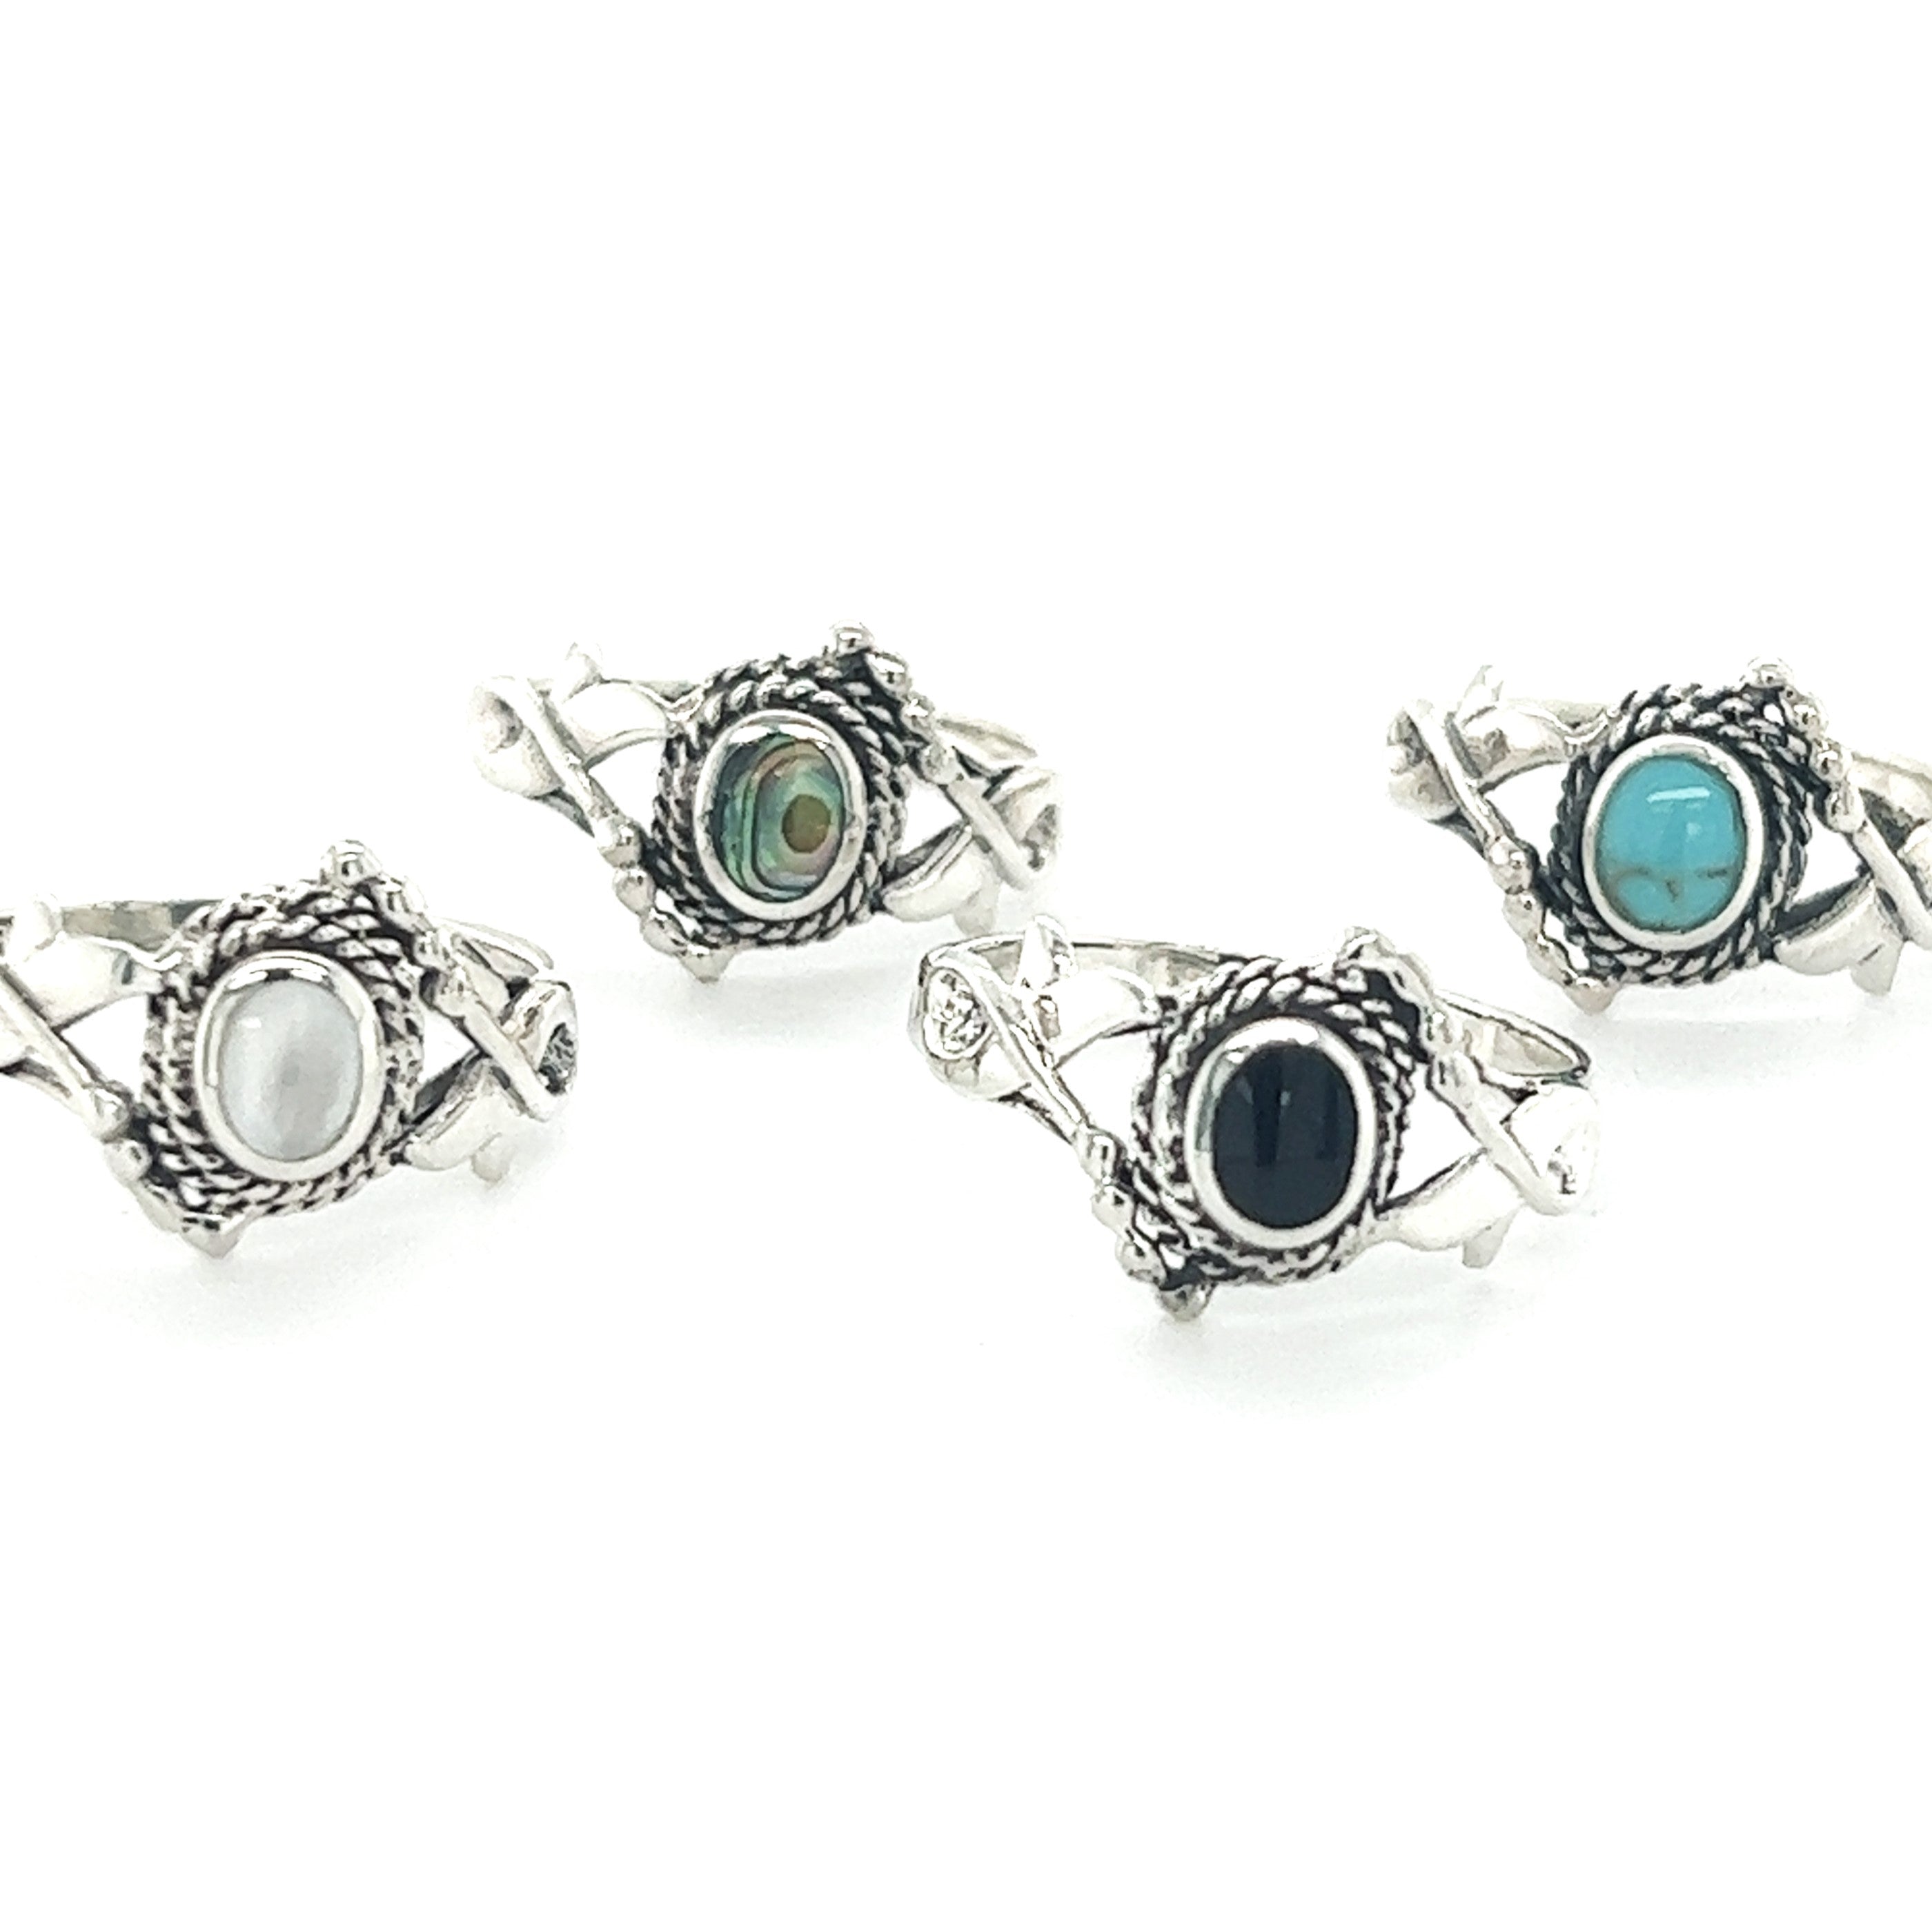 Silver Romance Rings - 4 Pack | Claire's US